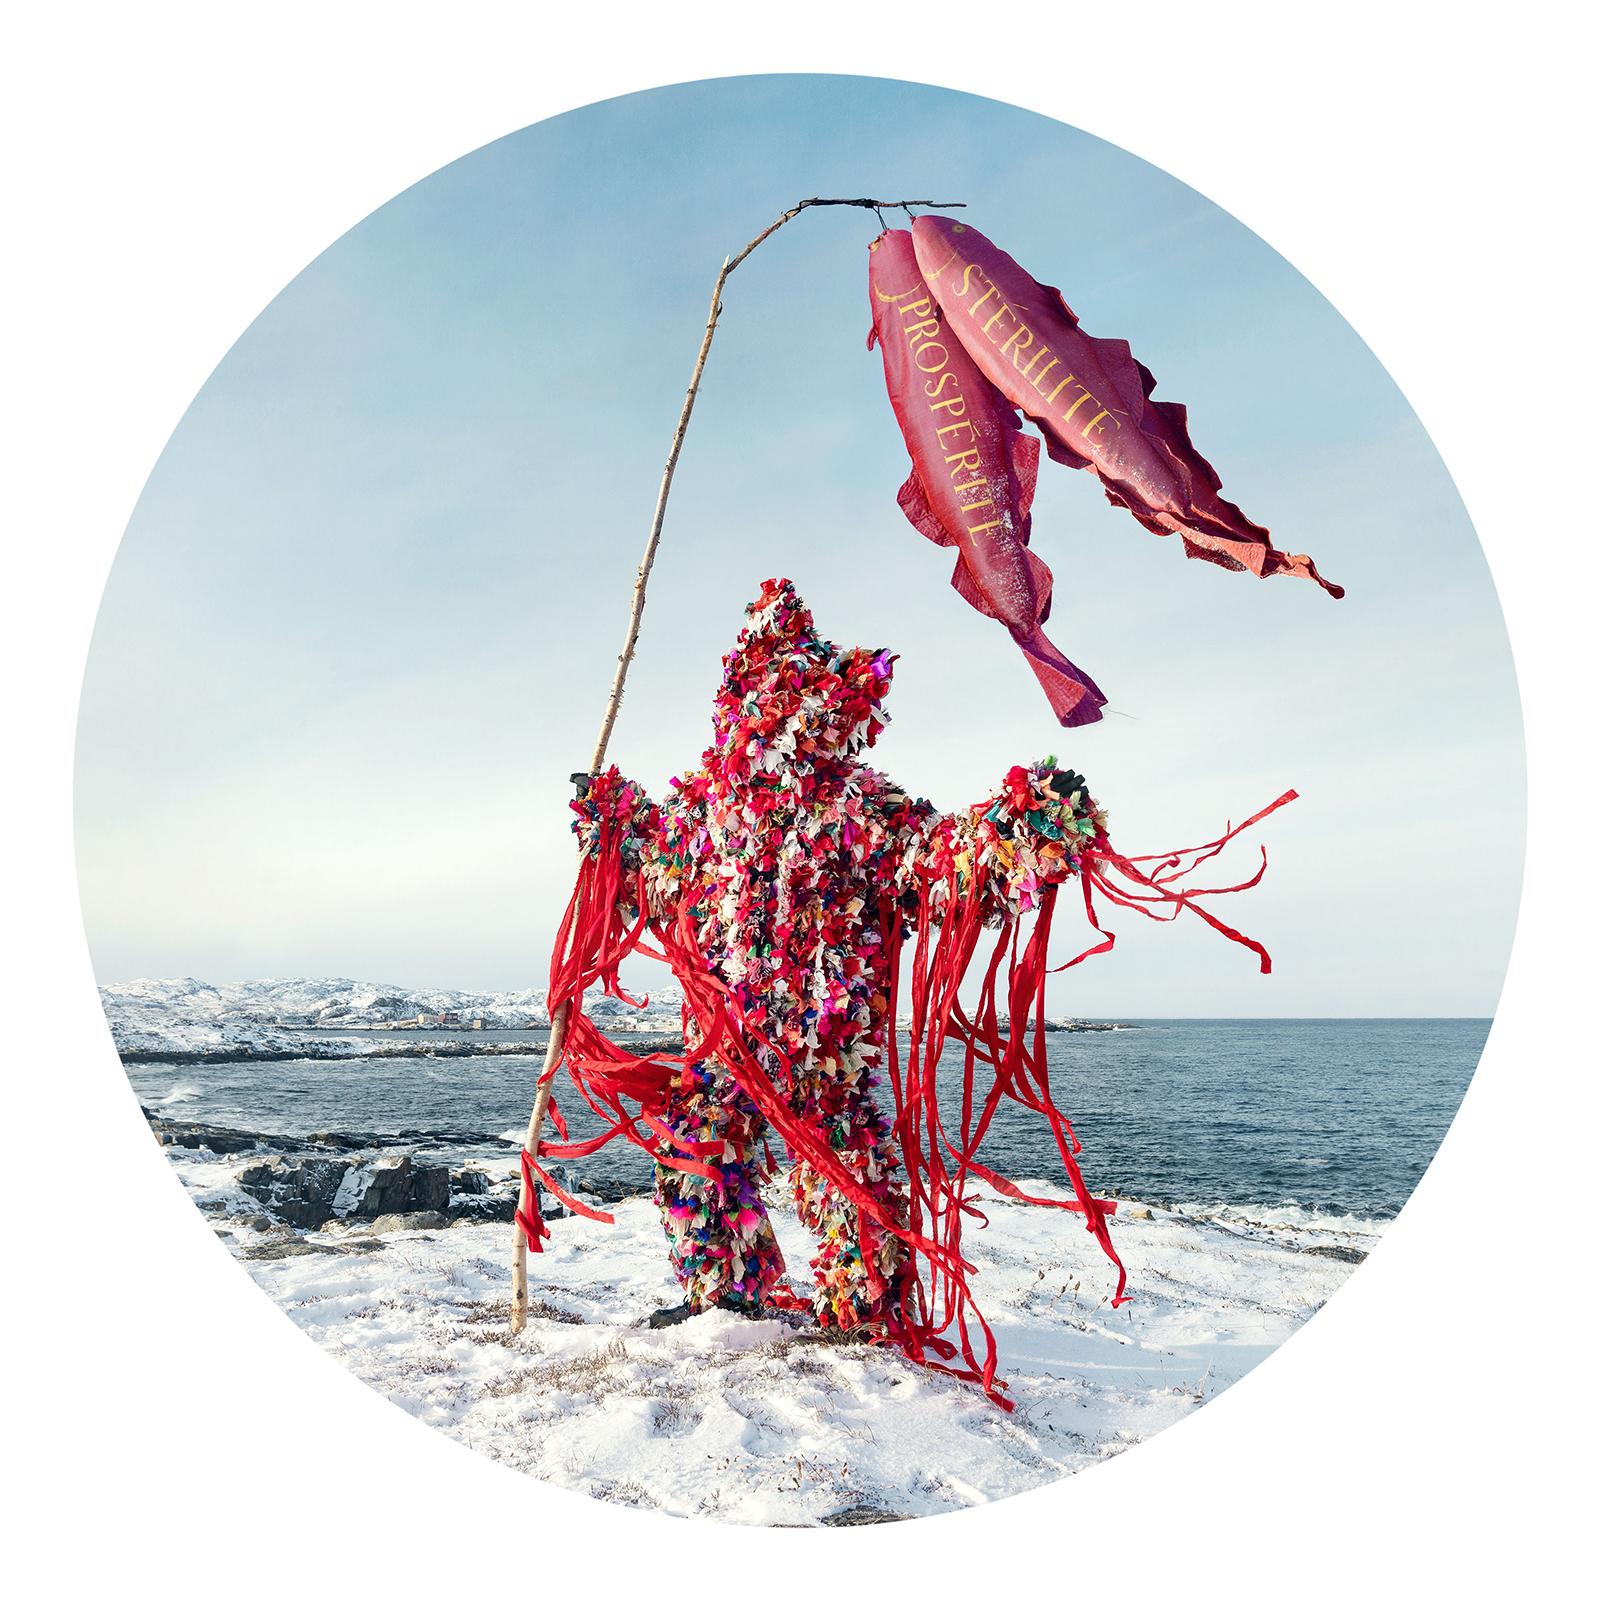 Nicholas Kahn & Richard Selesnick Figurative Photograph - Raggy (Circular Color Photograph of Red Mythical Figure in an Arctic Landscape) 